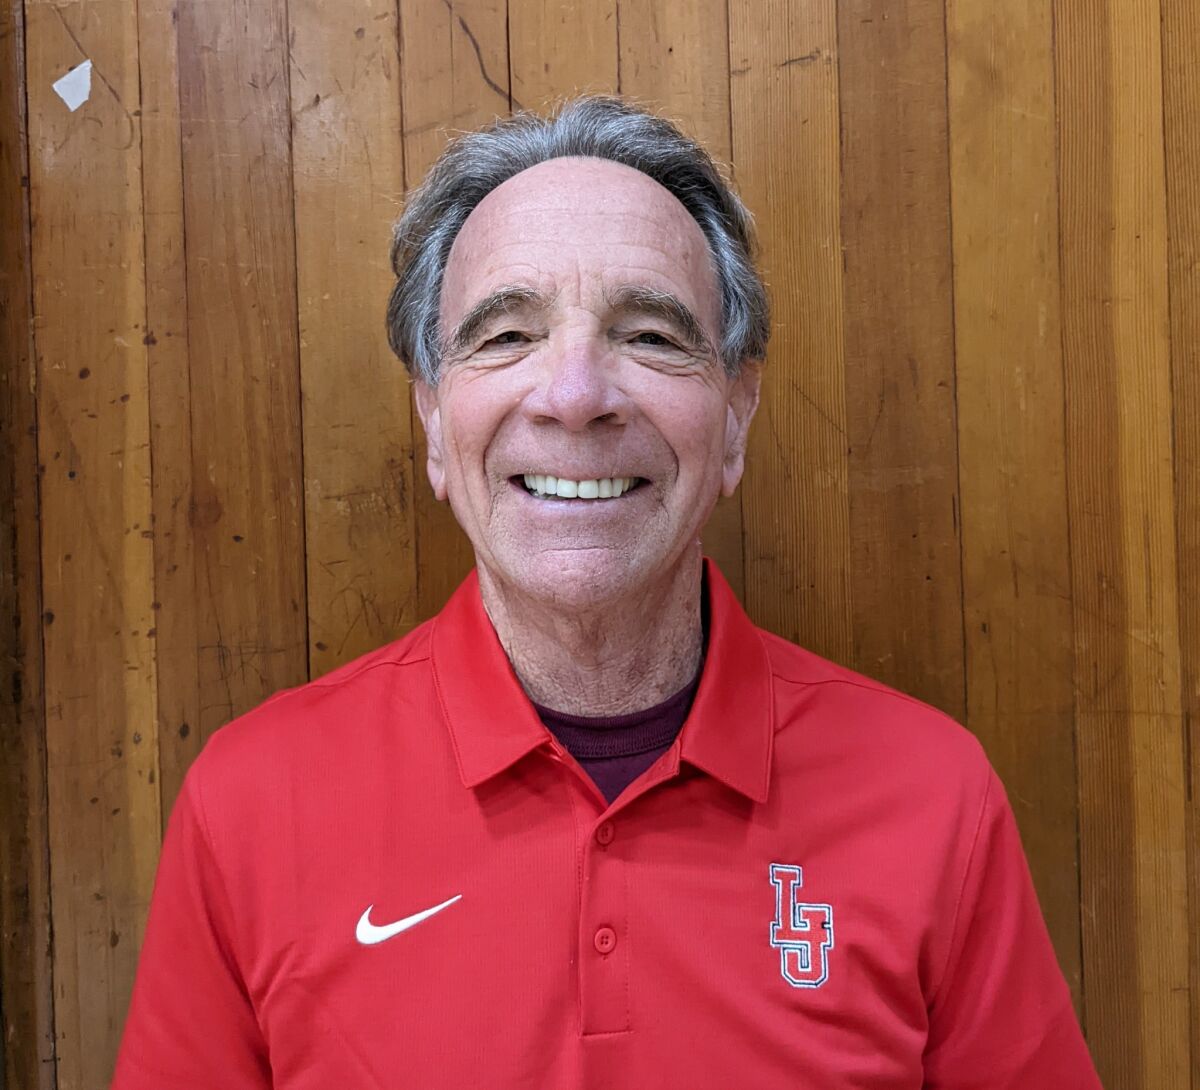 La Jolla High School girls varsity basketball coach Bill Busch says his continuing players will lead the program to success.